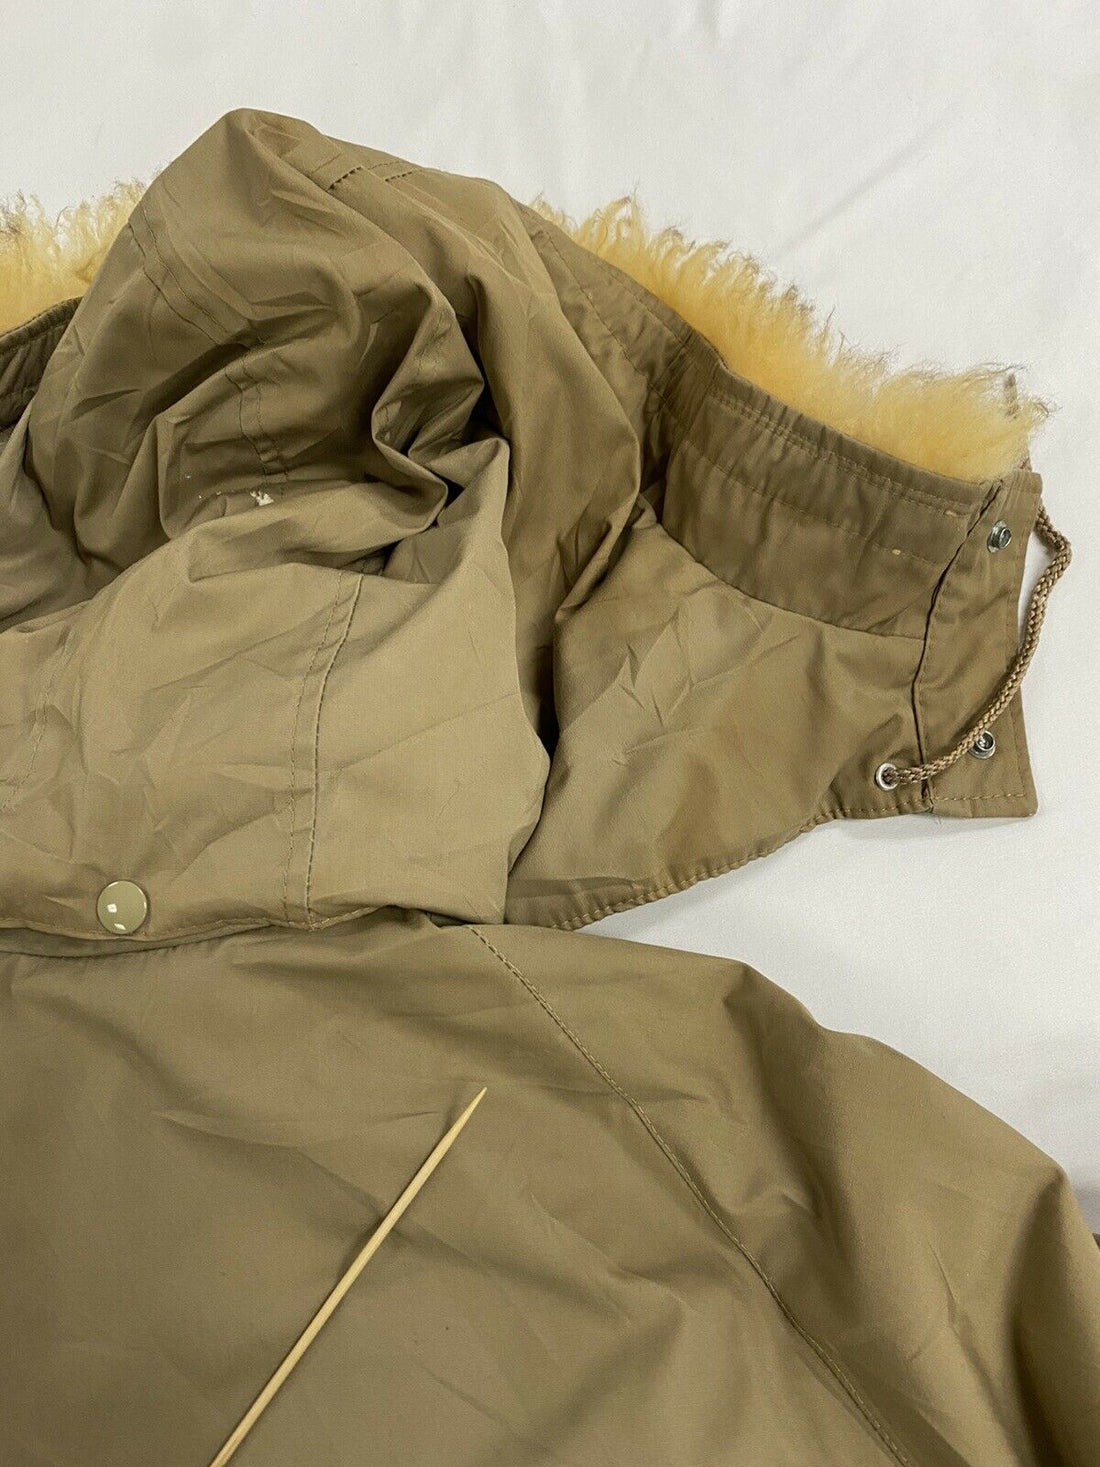 Vintage Sears Parka Puffer Jacket Size 40 Beige Tan Down Insulated Made Canada